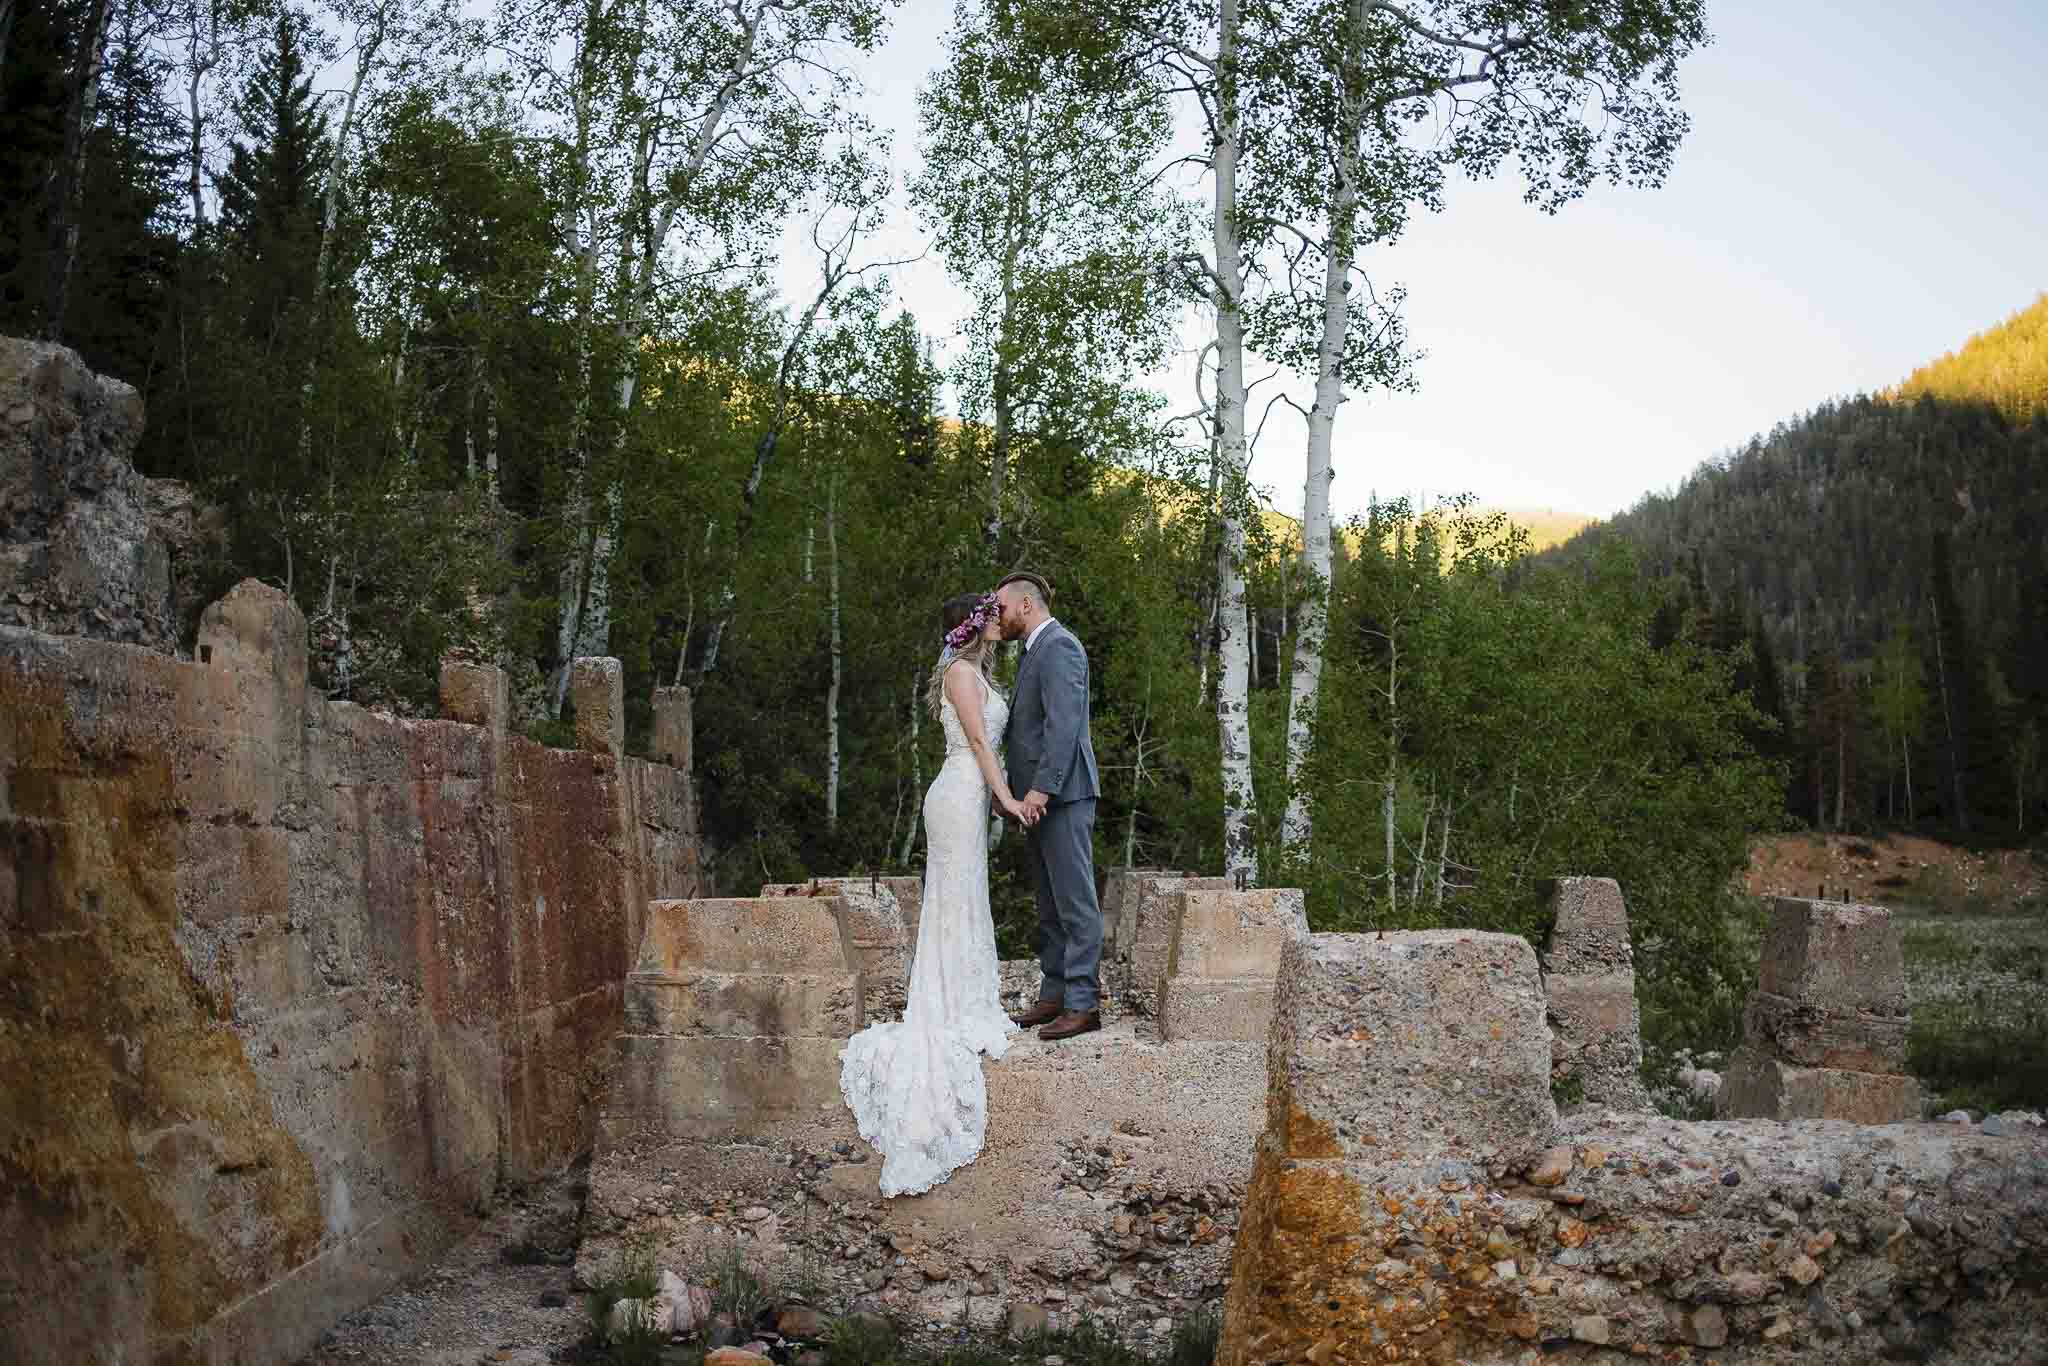 Couple pose for wedding pictures at Forest City, Utah